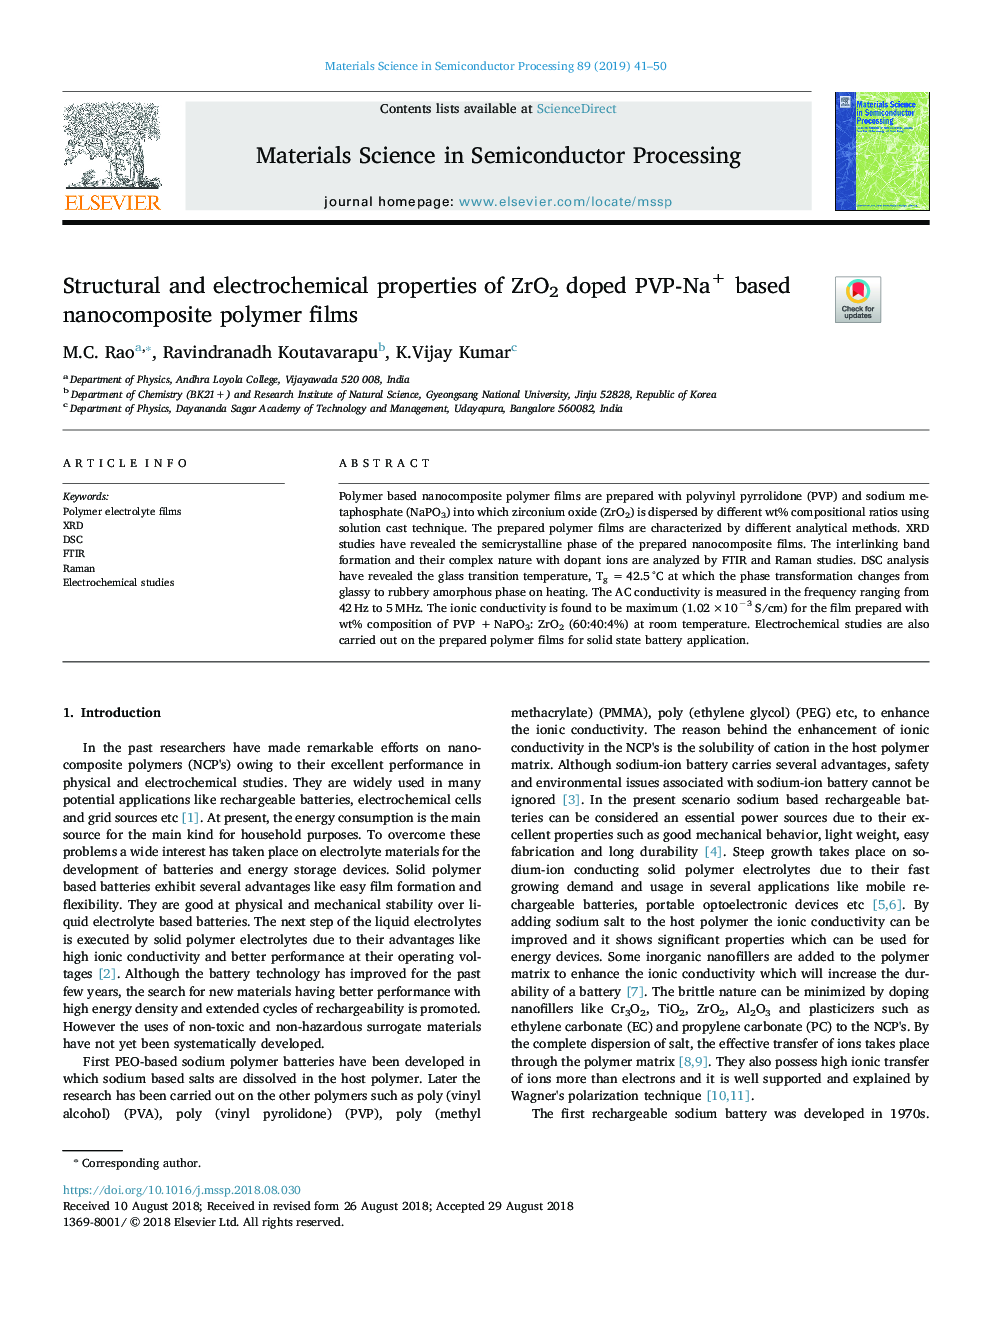 Structural and electrochemical properties of ZrO2 doped PVP-Na+ based nanocomposite polymer films